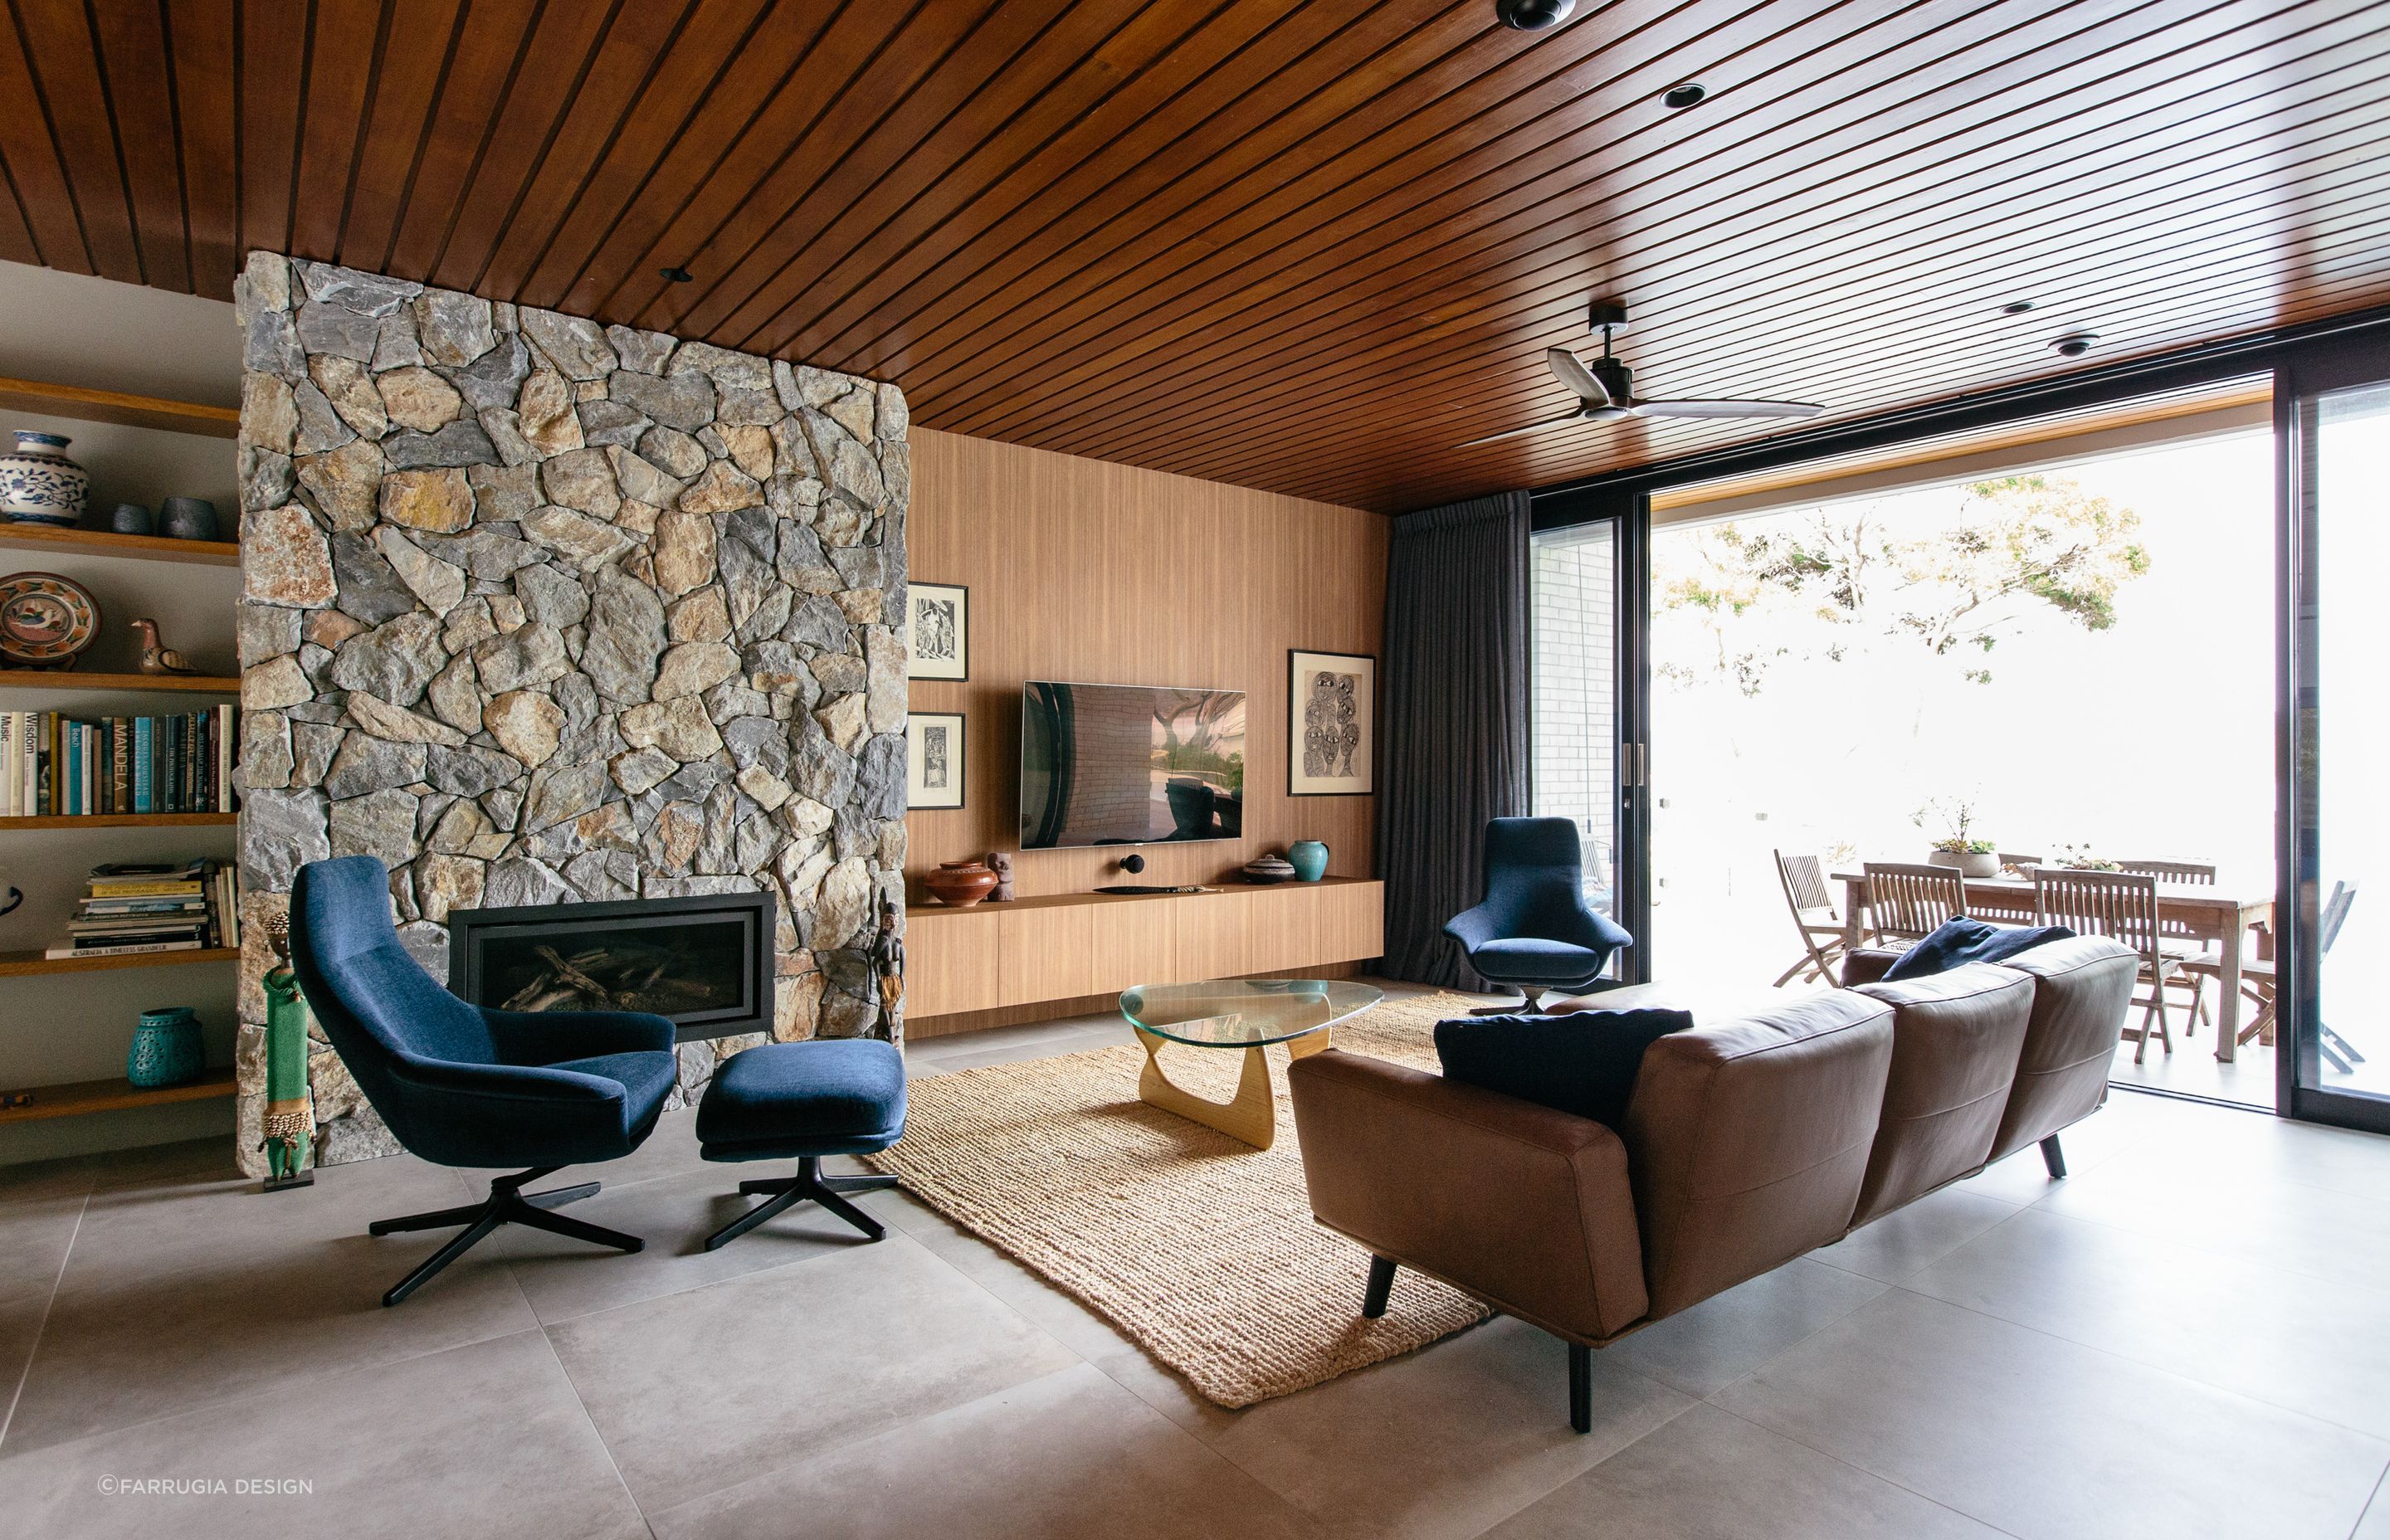 The immaculate interior of the Avalon Mid Century House - Photography: Caroline McCredie